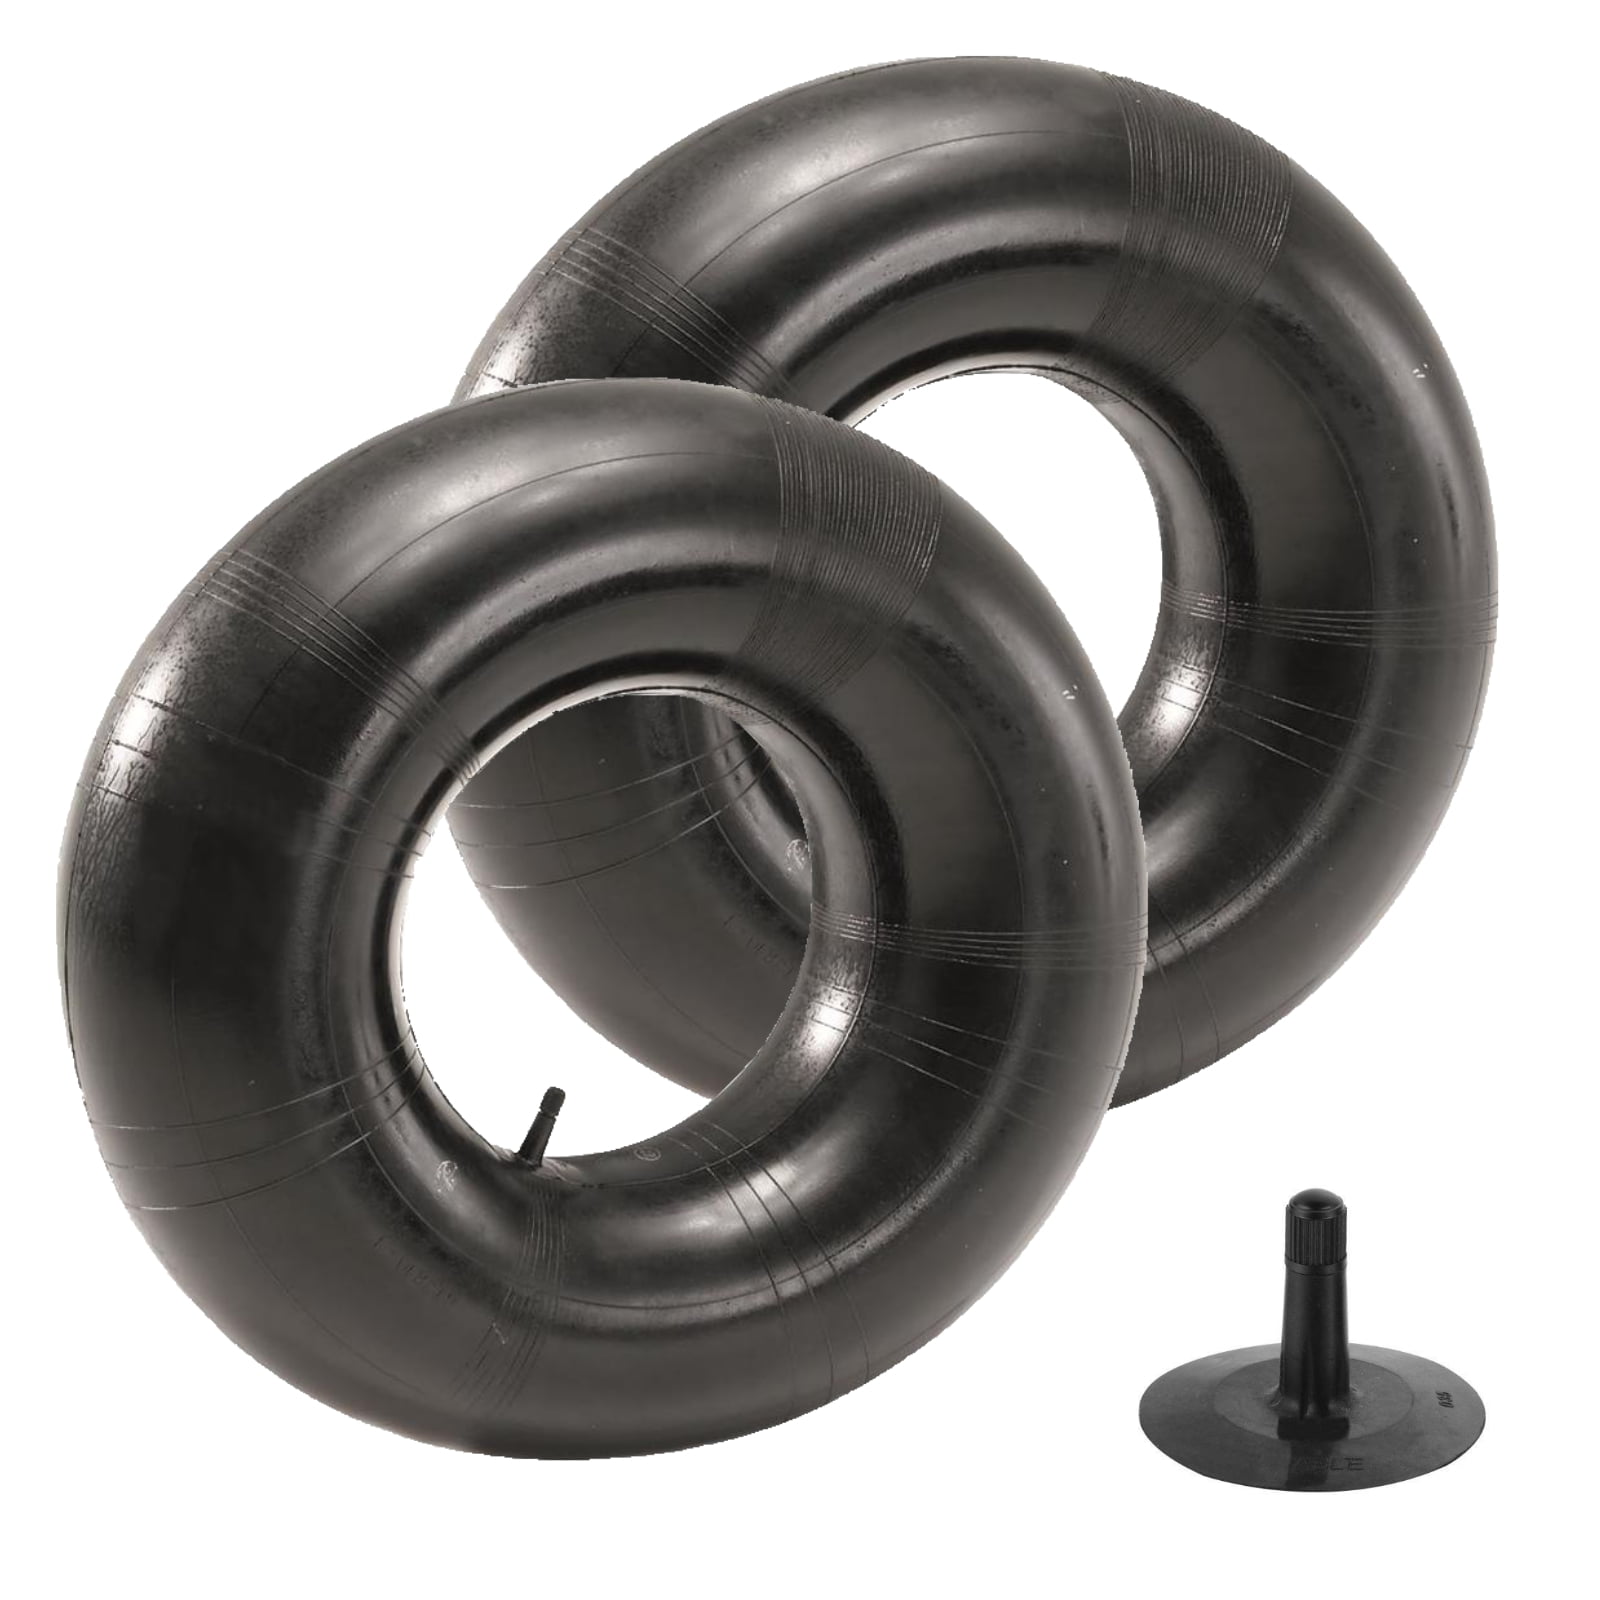 Industrial Tire Inner Tube with JS2 Metal Valve fits 6.00-9 6.00x9 6.90-9 6.90x9 9 Radial Bias Trailer Tire 